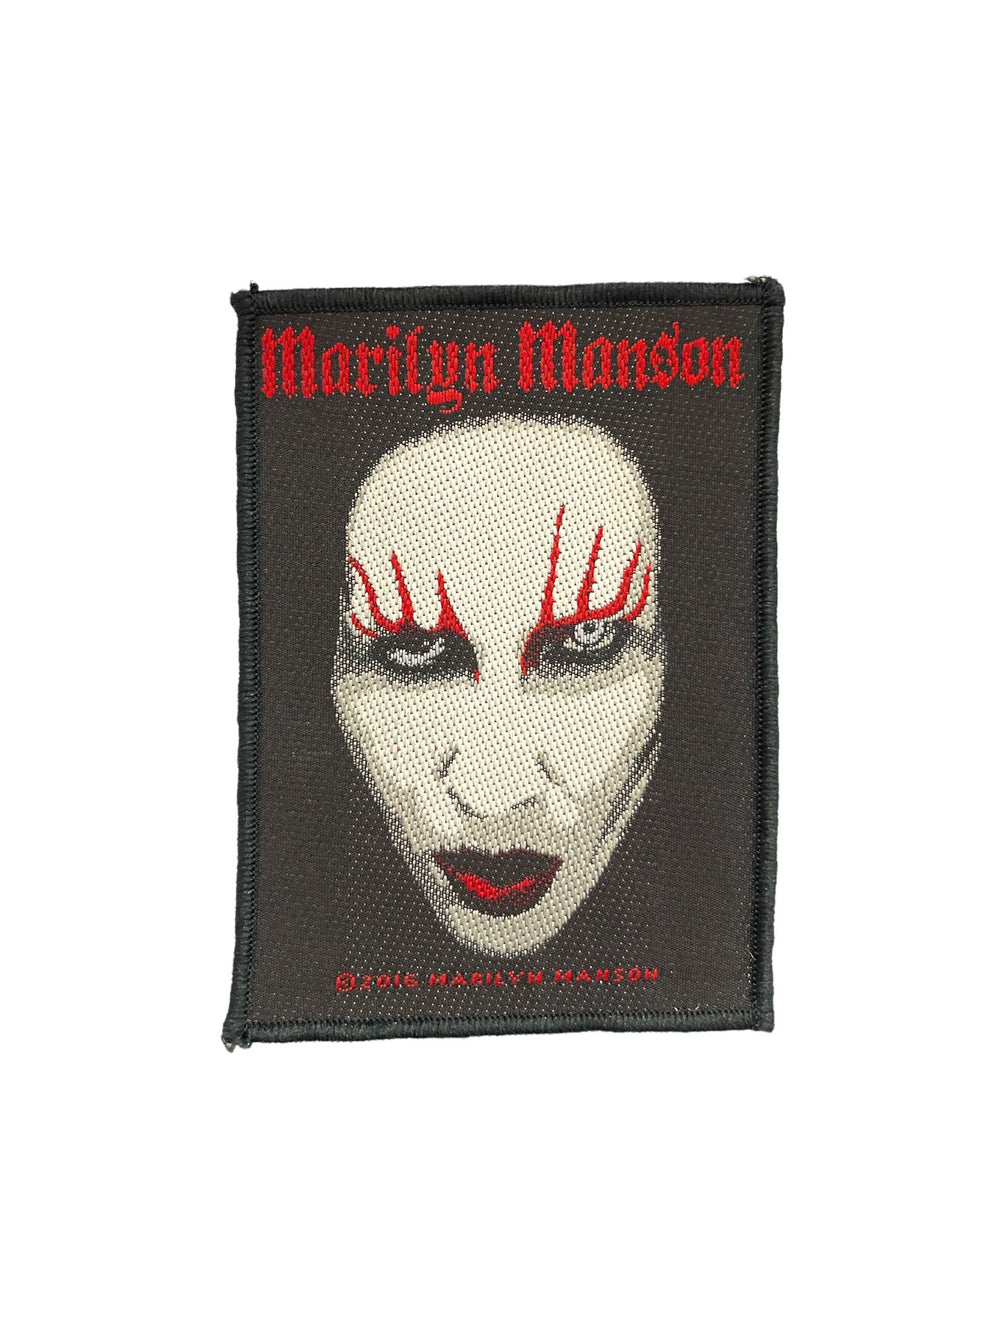 Marilyn Manson Face Official Woven Patch Brand New